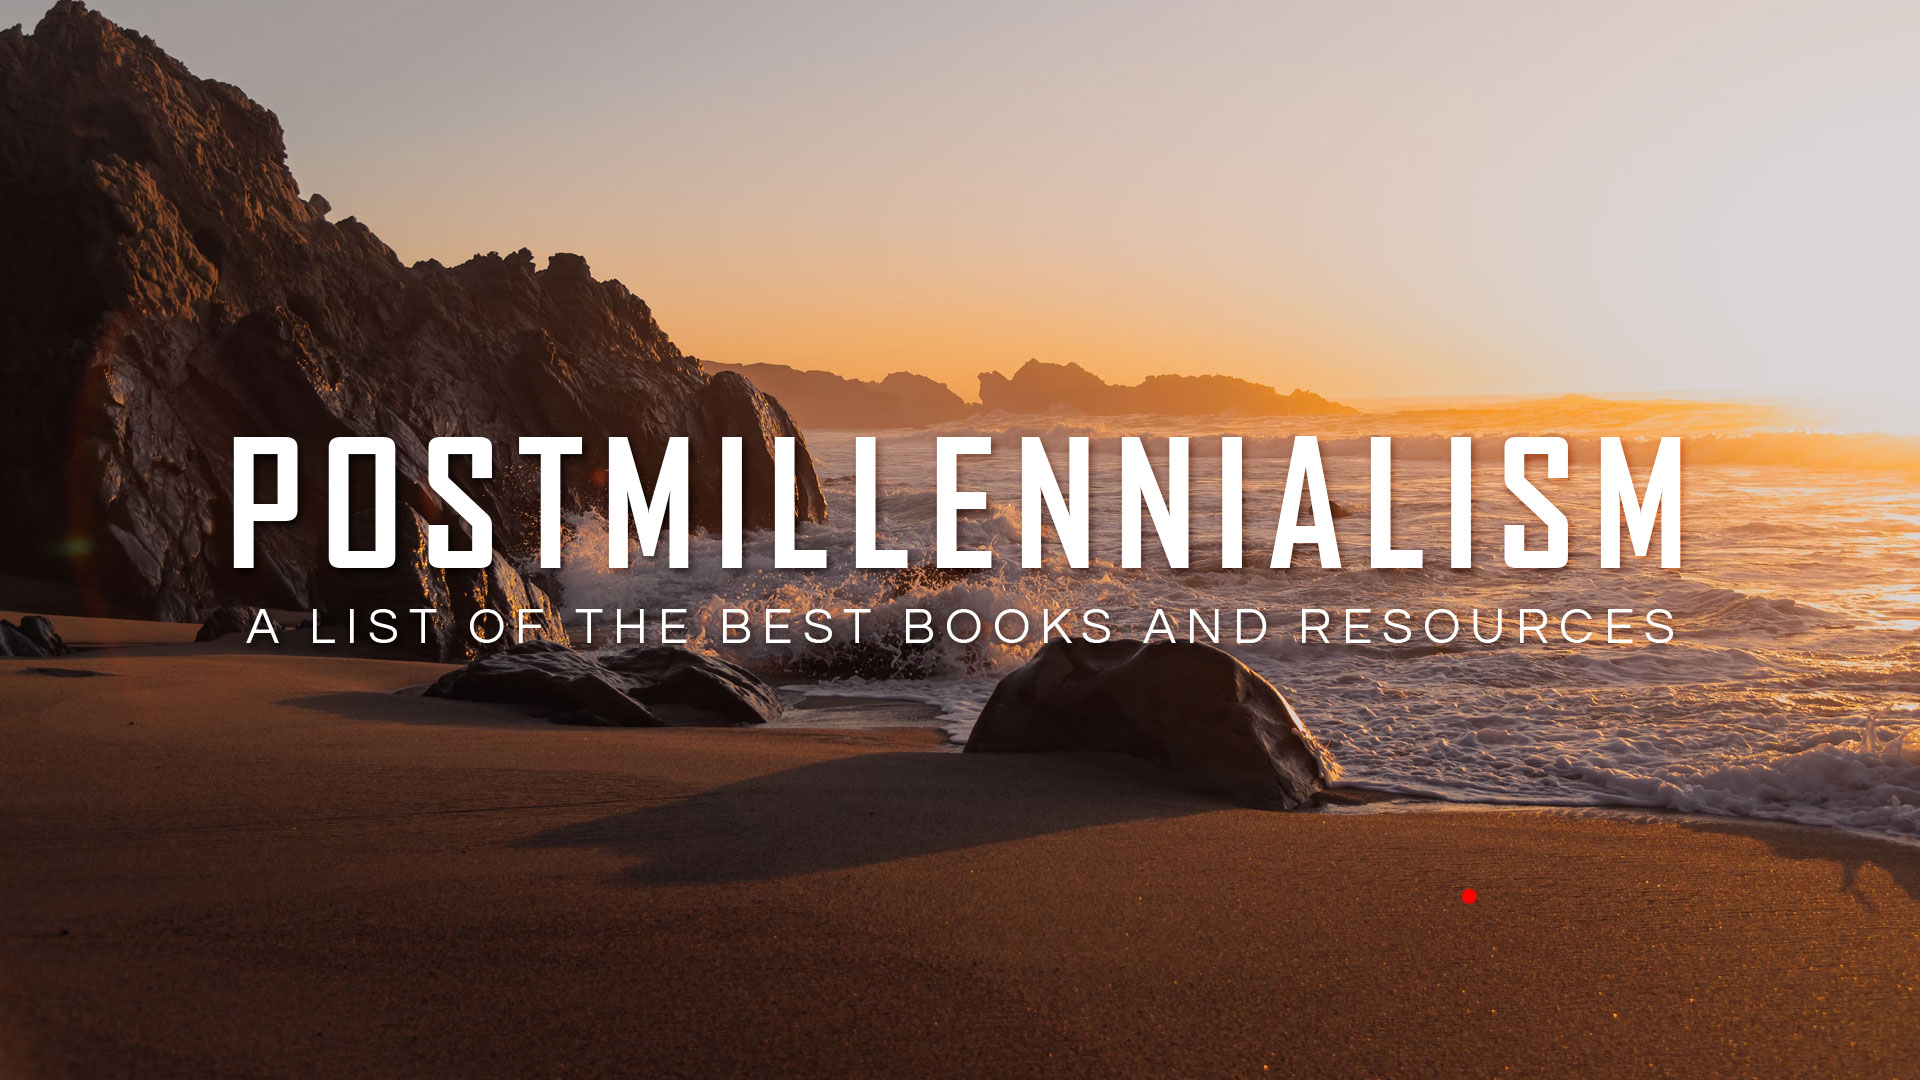 Resources on Postmillennialism